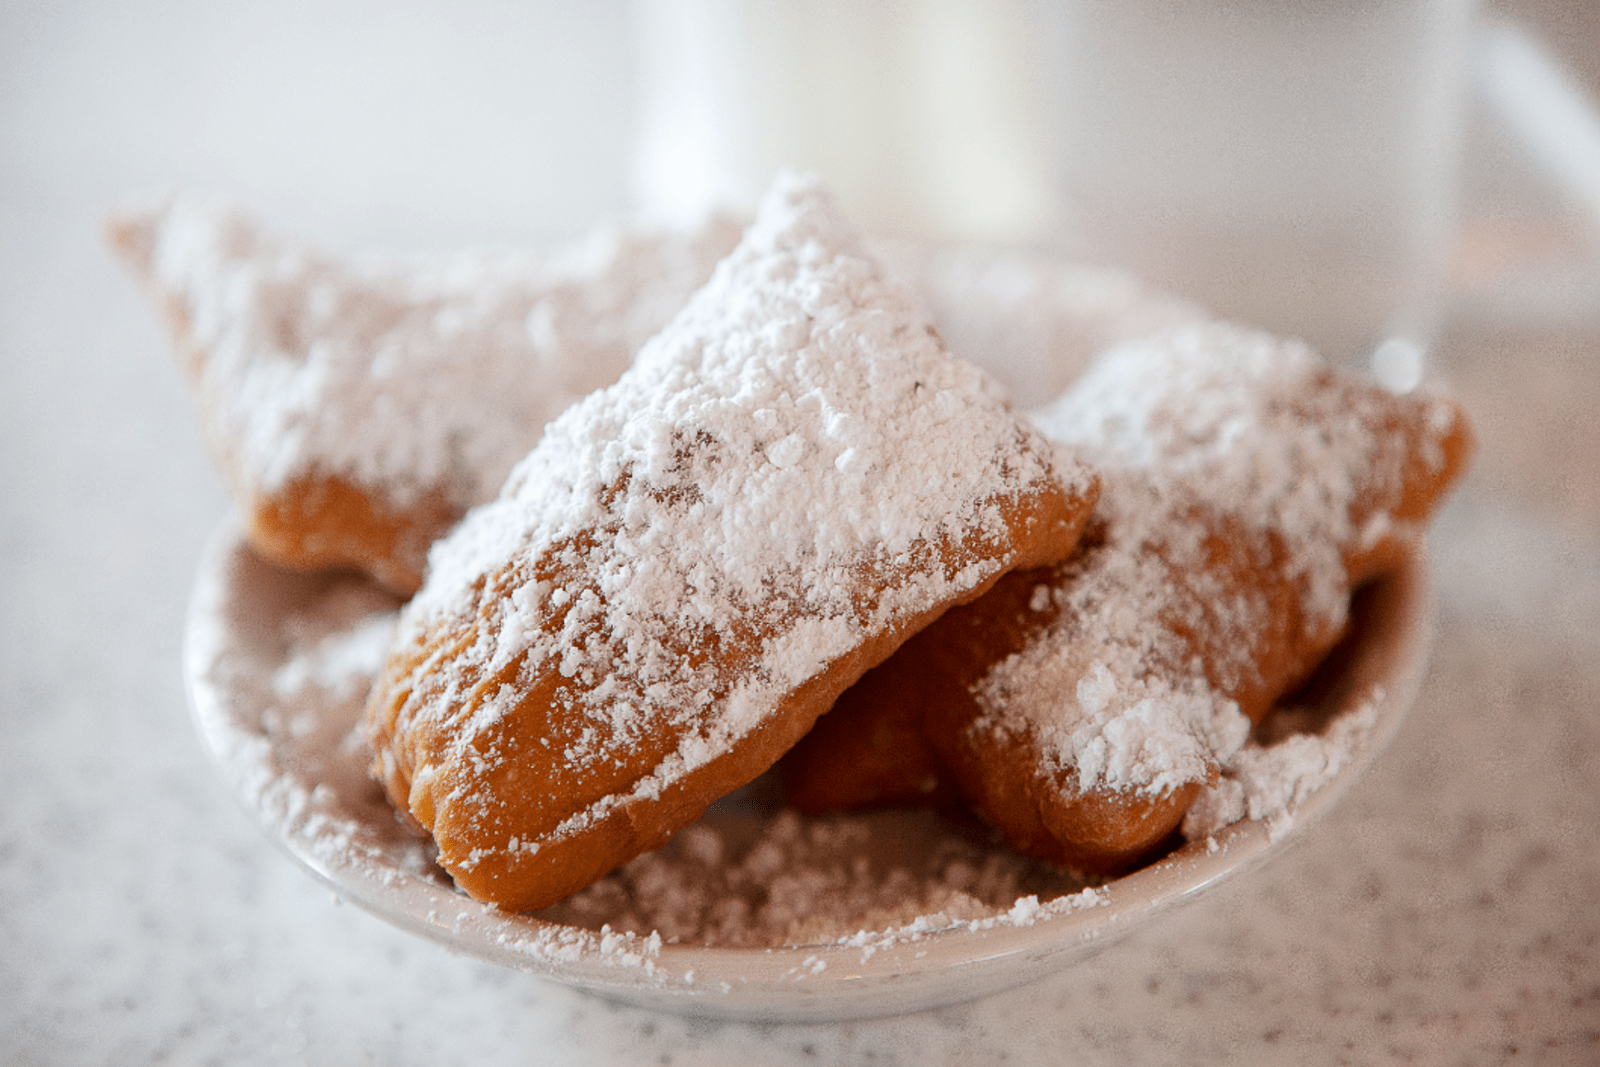 New Orleans is famous for its beignets